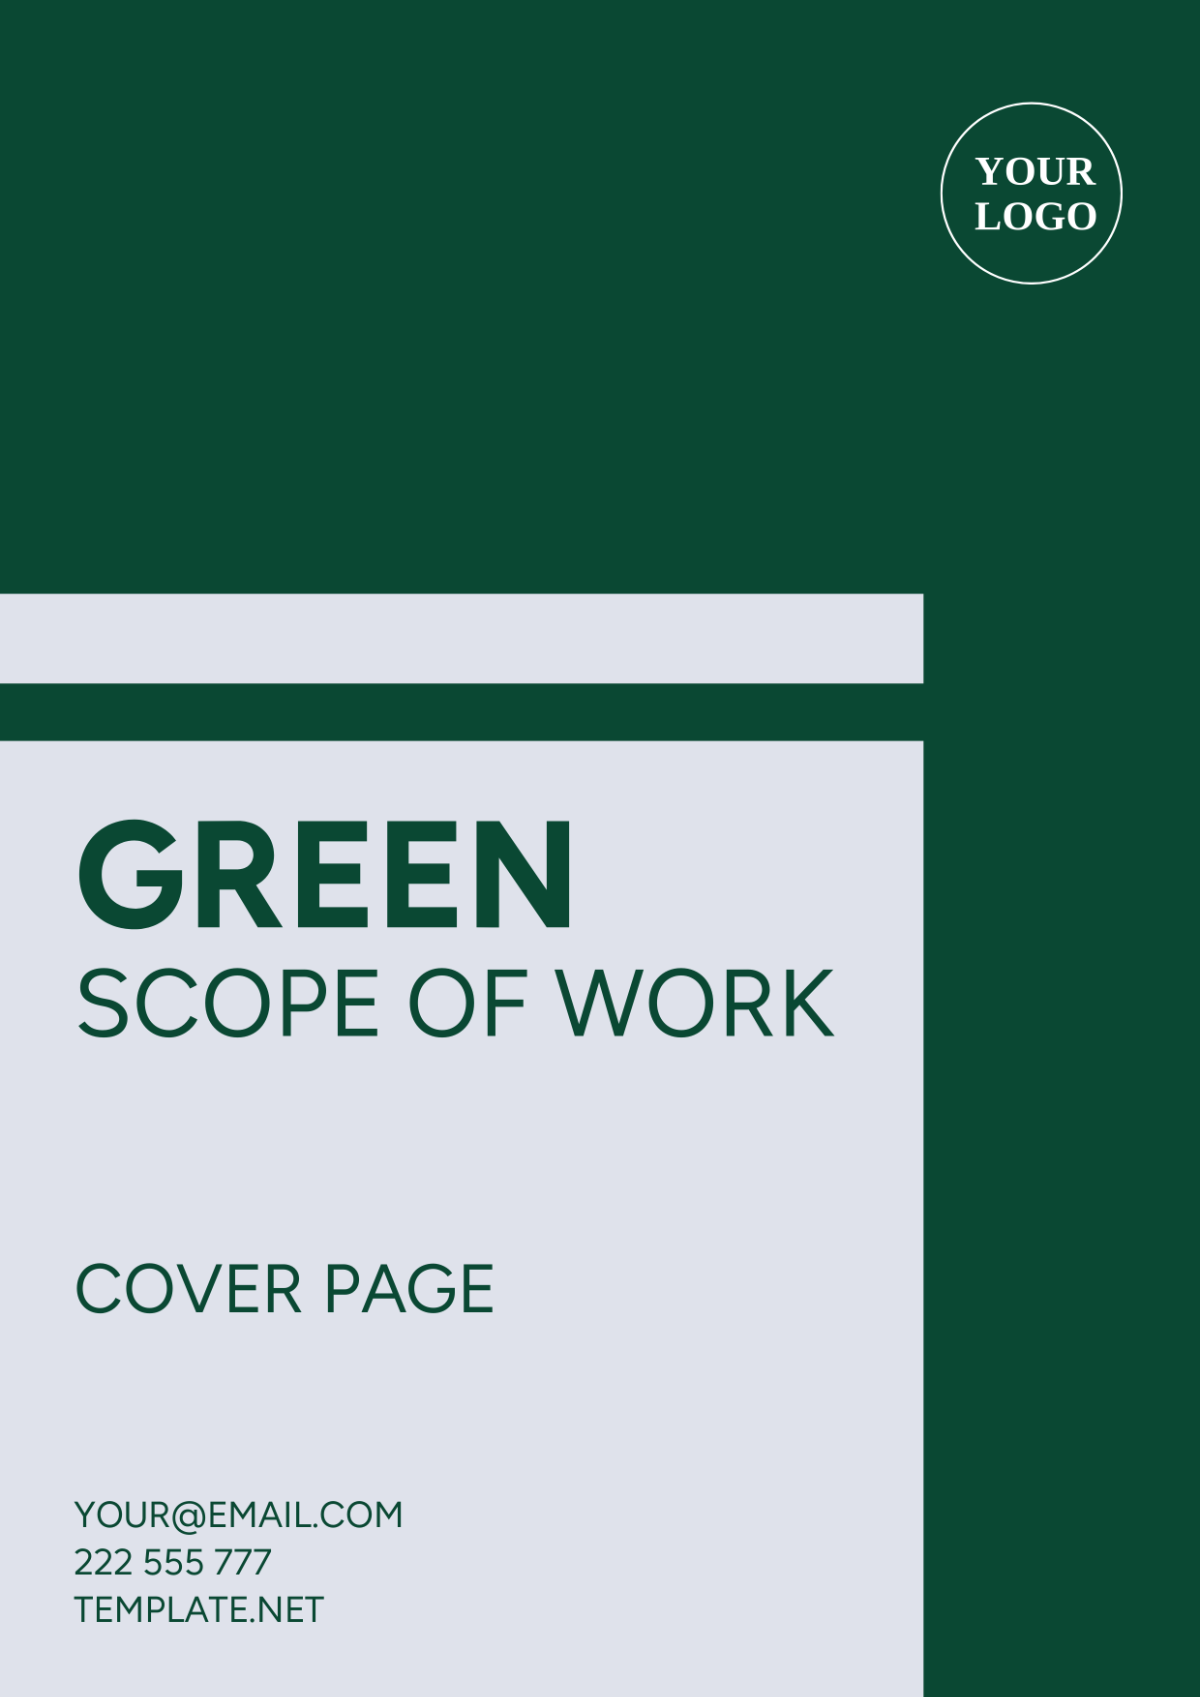 Green Scope of Work Cover Page Template